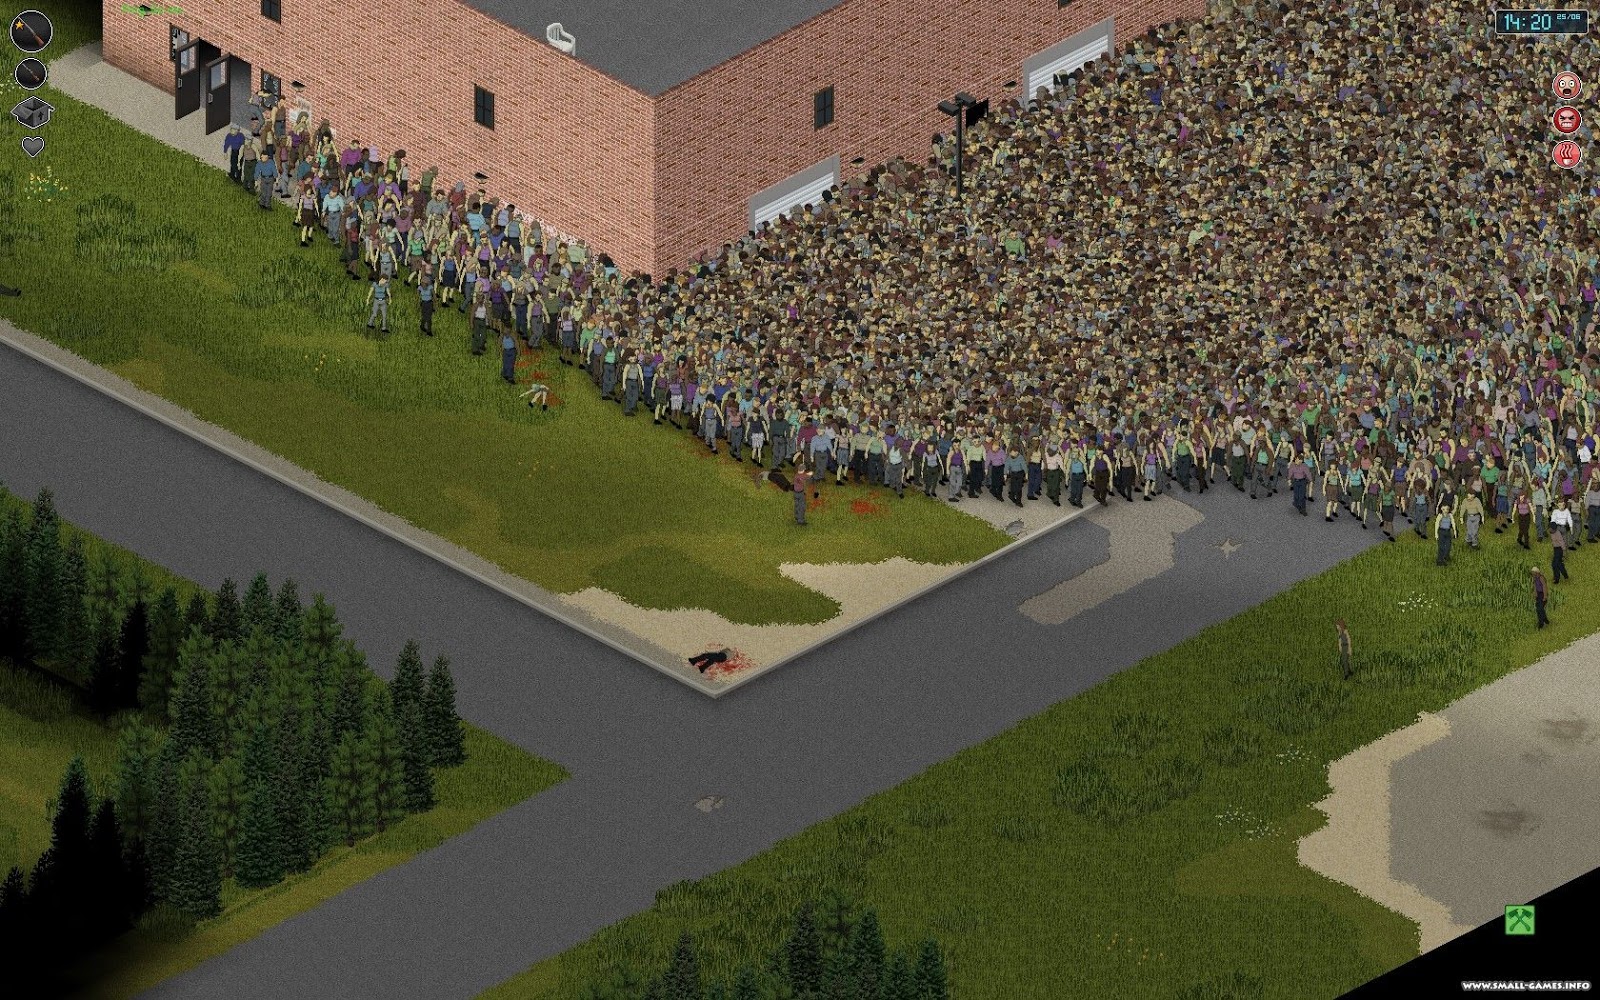 project zomboid free download 2018